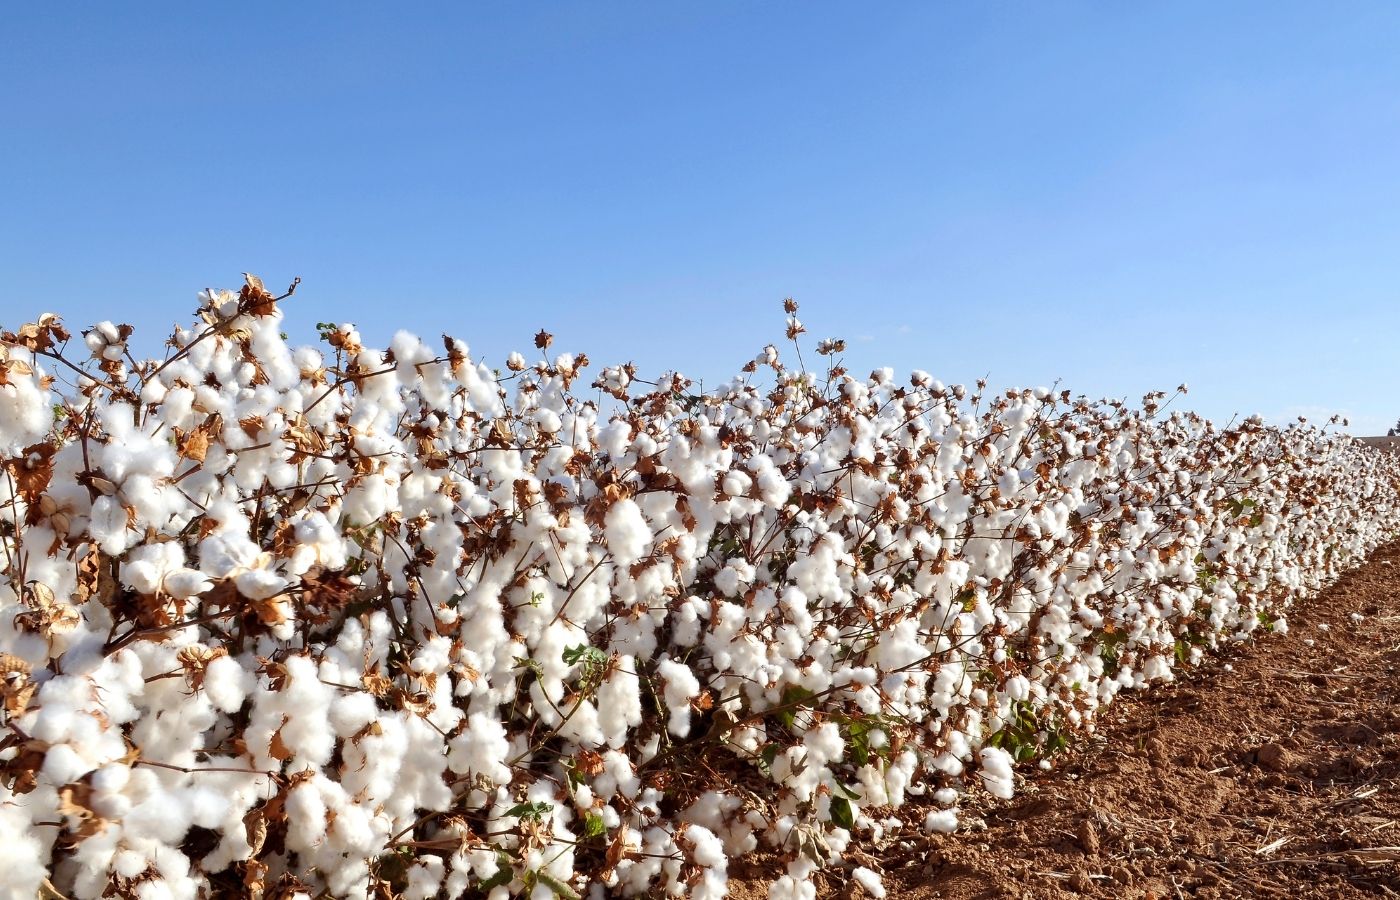 What is the real difference between organic cotton and regular